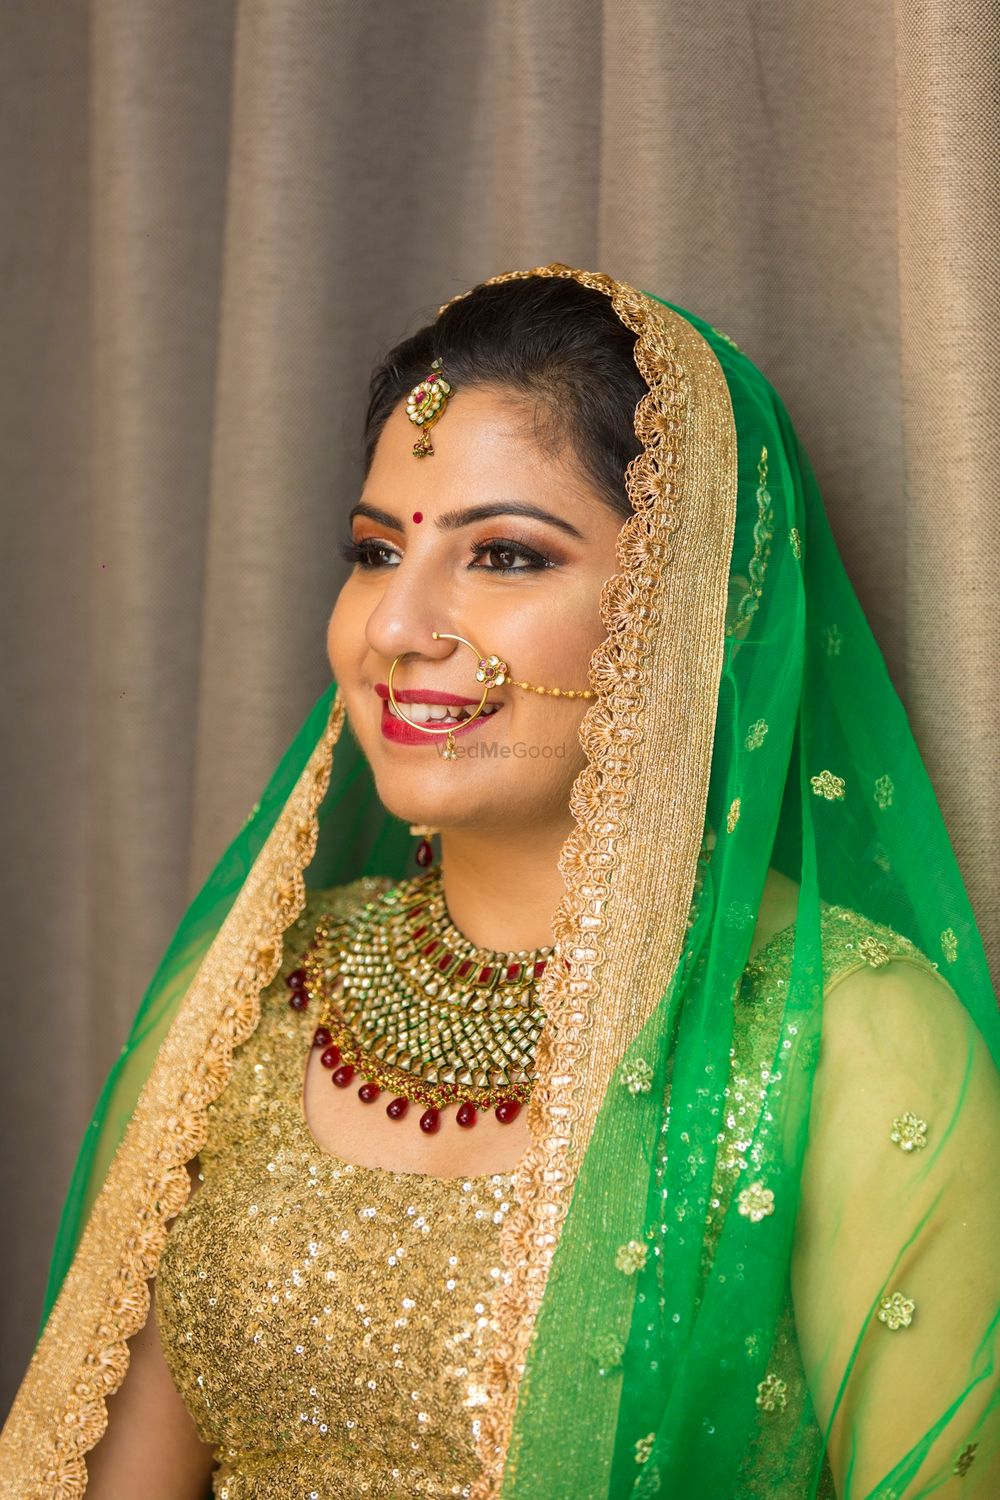 Photo From Brides Of Ashima  - By Makeup Stories by Ashima